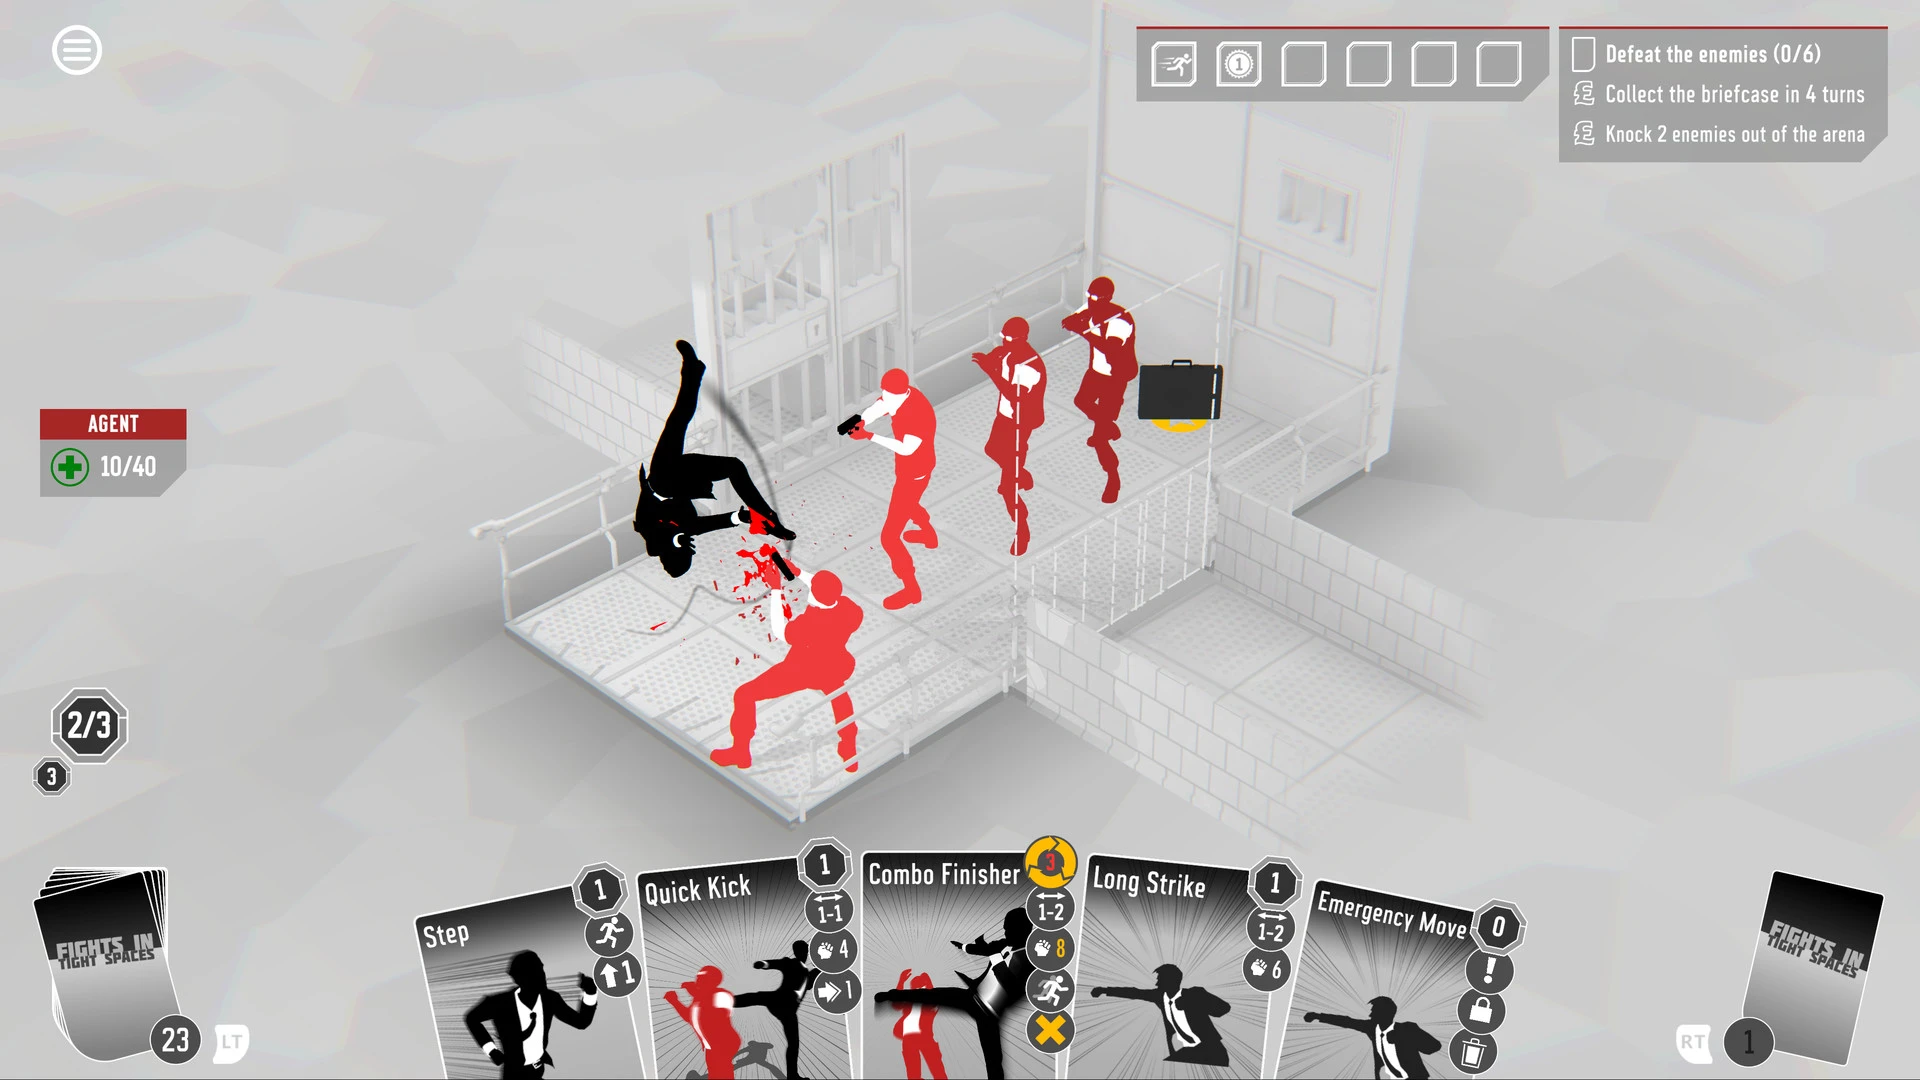 Fights in Tight Spaces Screenshot